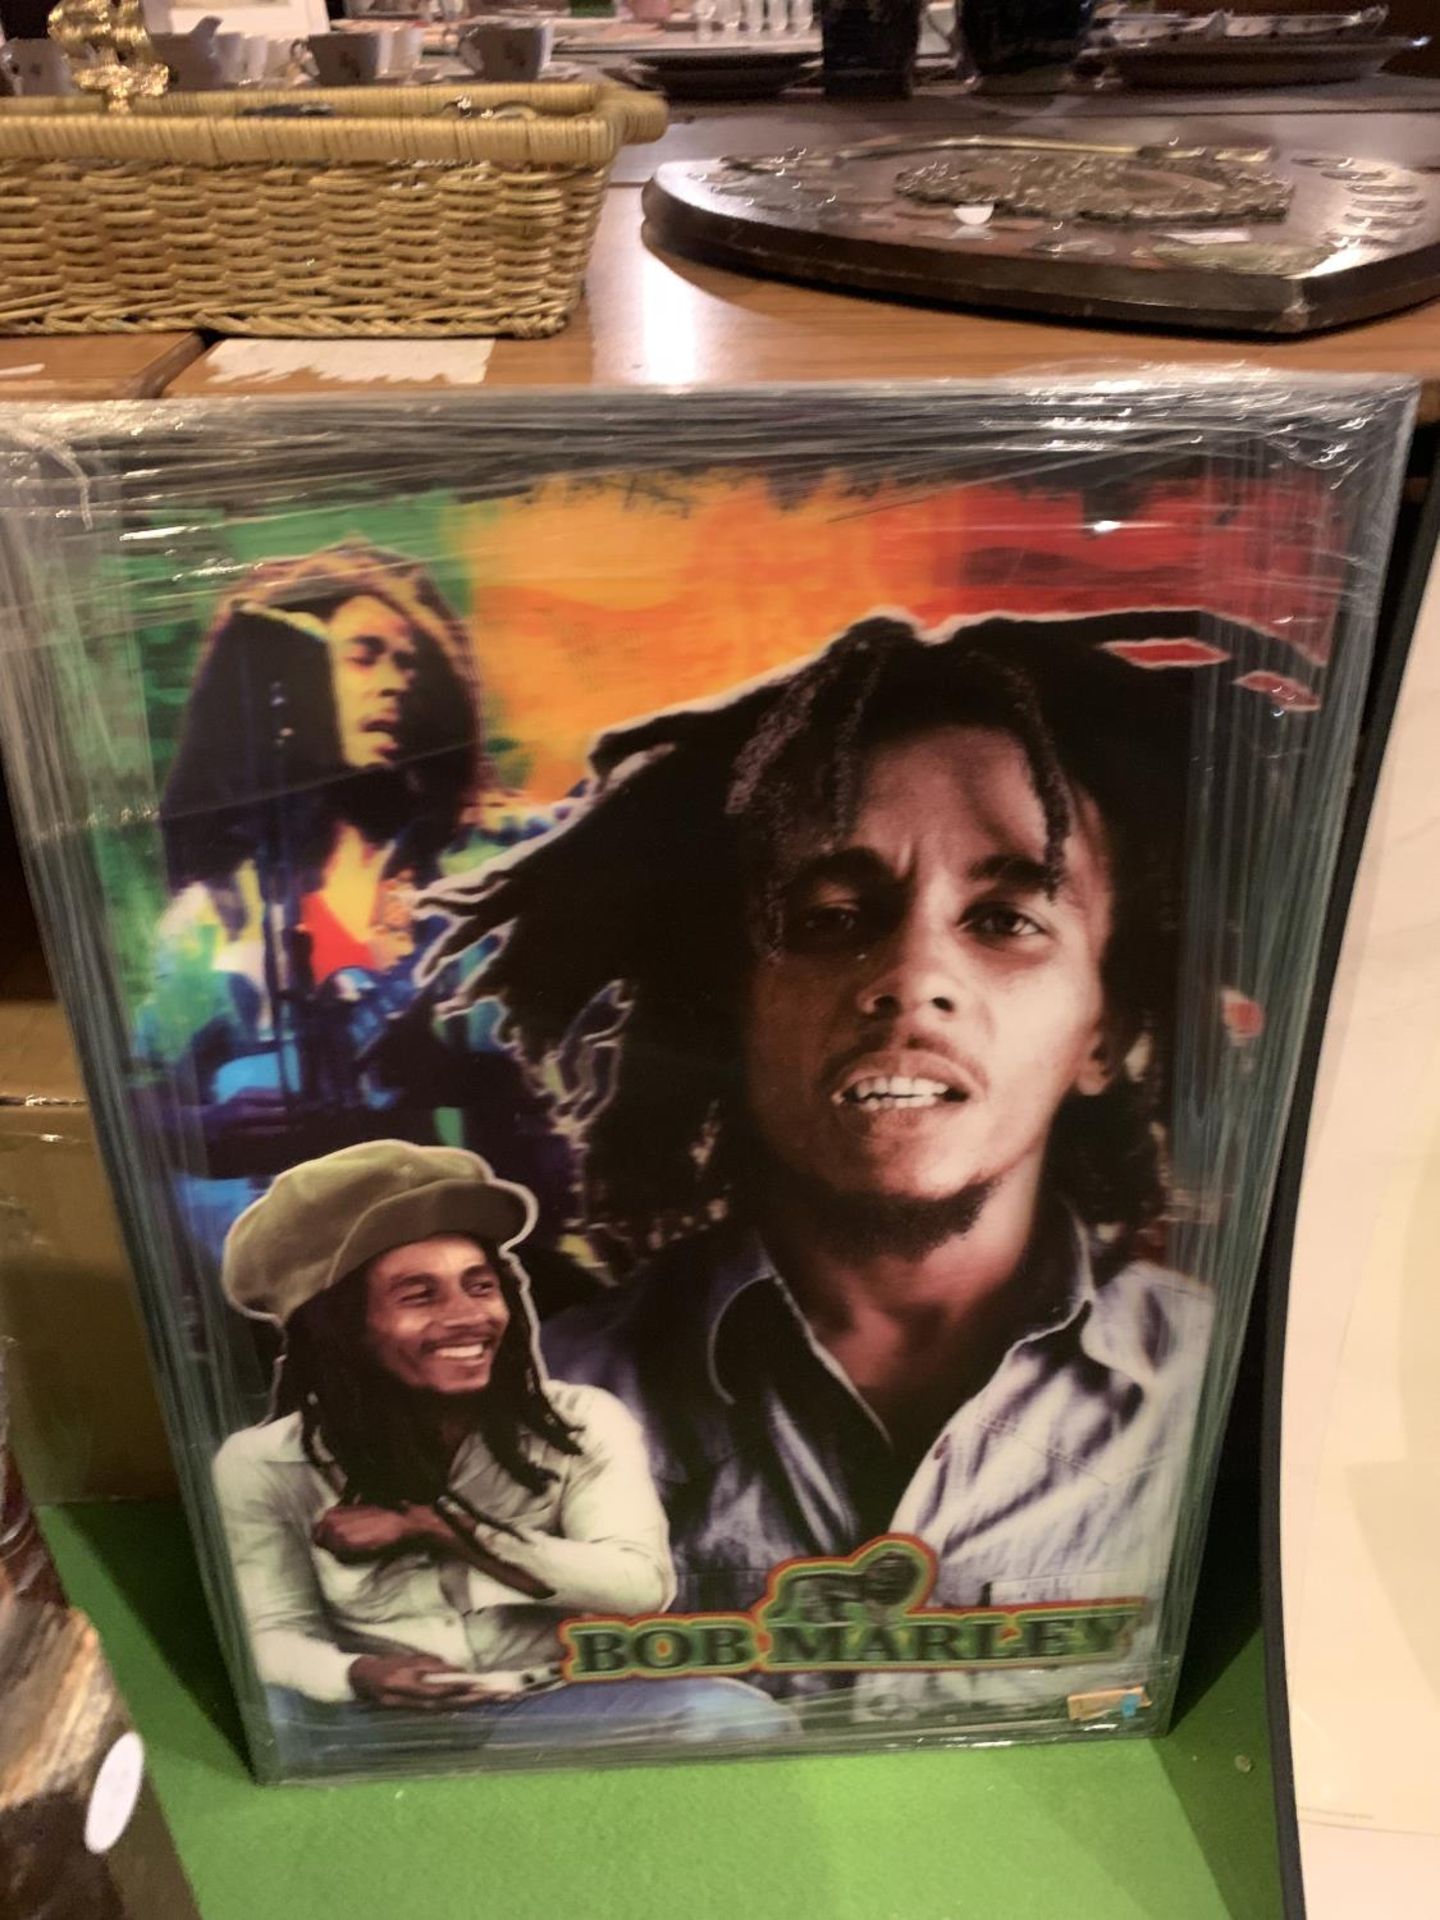 A 3D PICTURE OF BOB MARLEY - Image 2 of 4